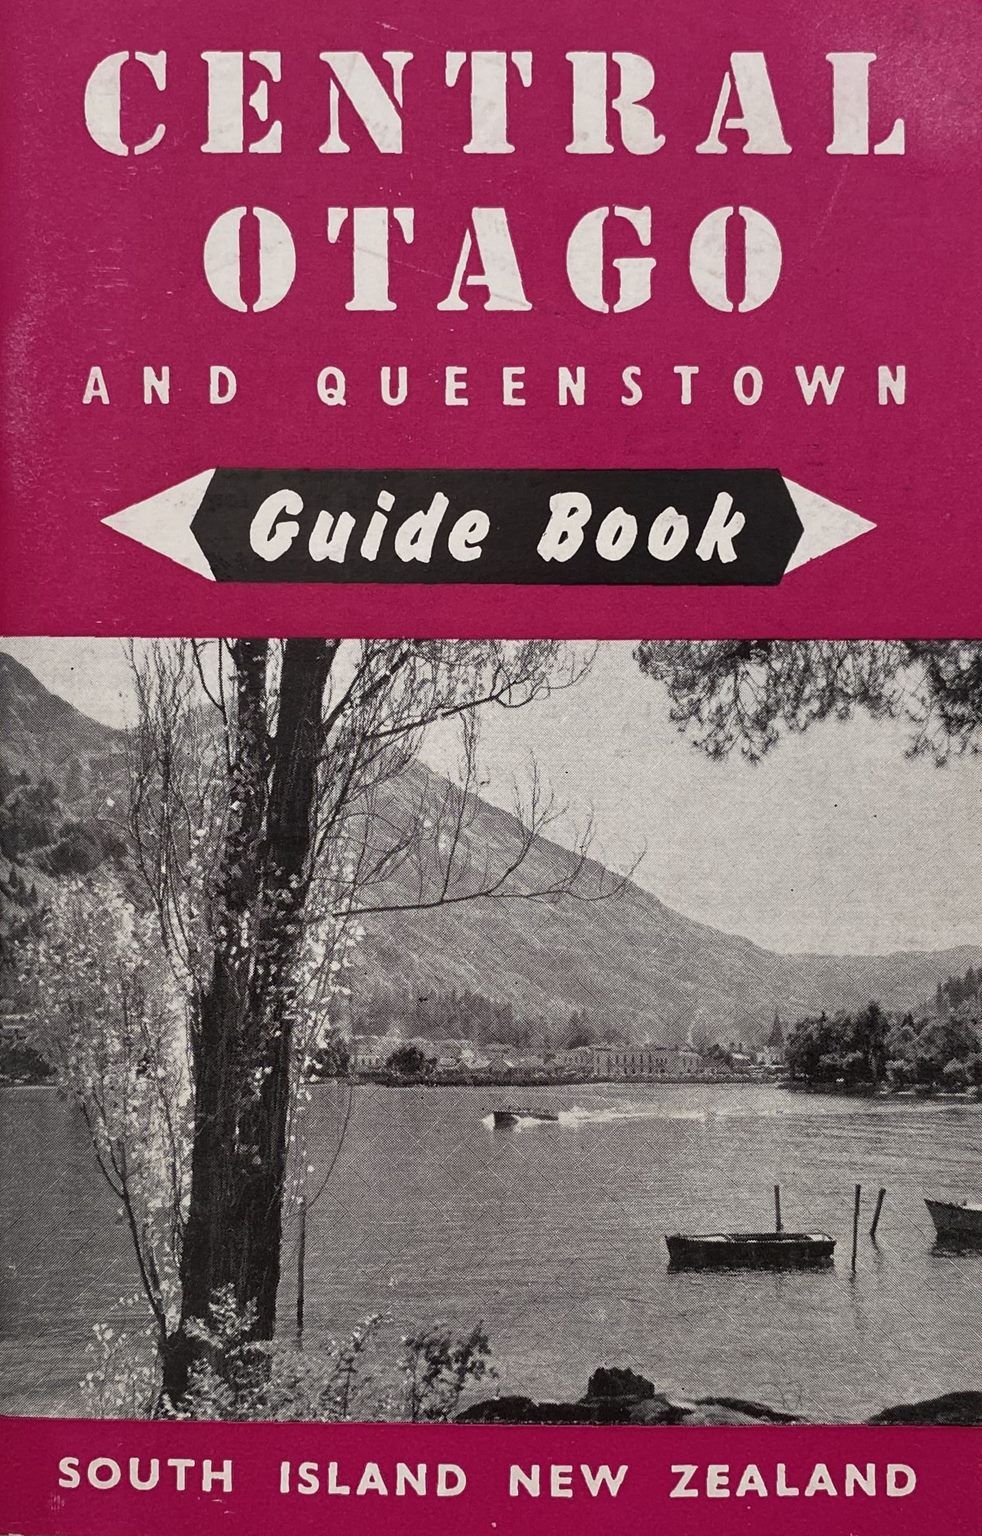 CENTRAL OTAGO and Queenstown - Guide Book